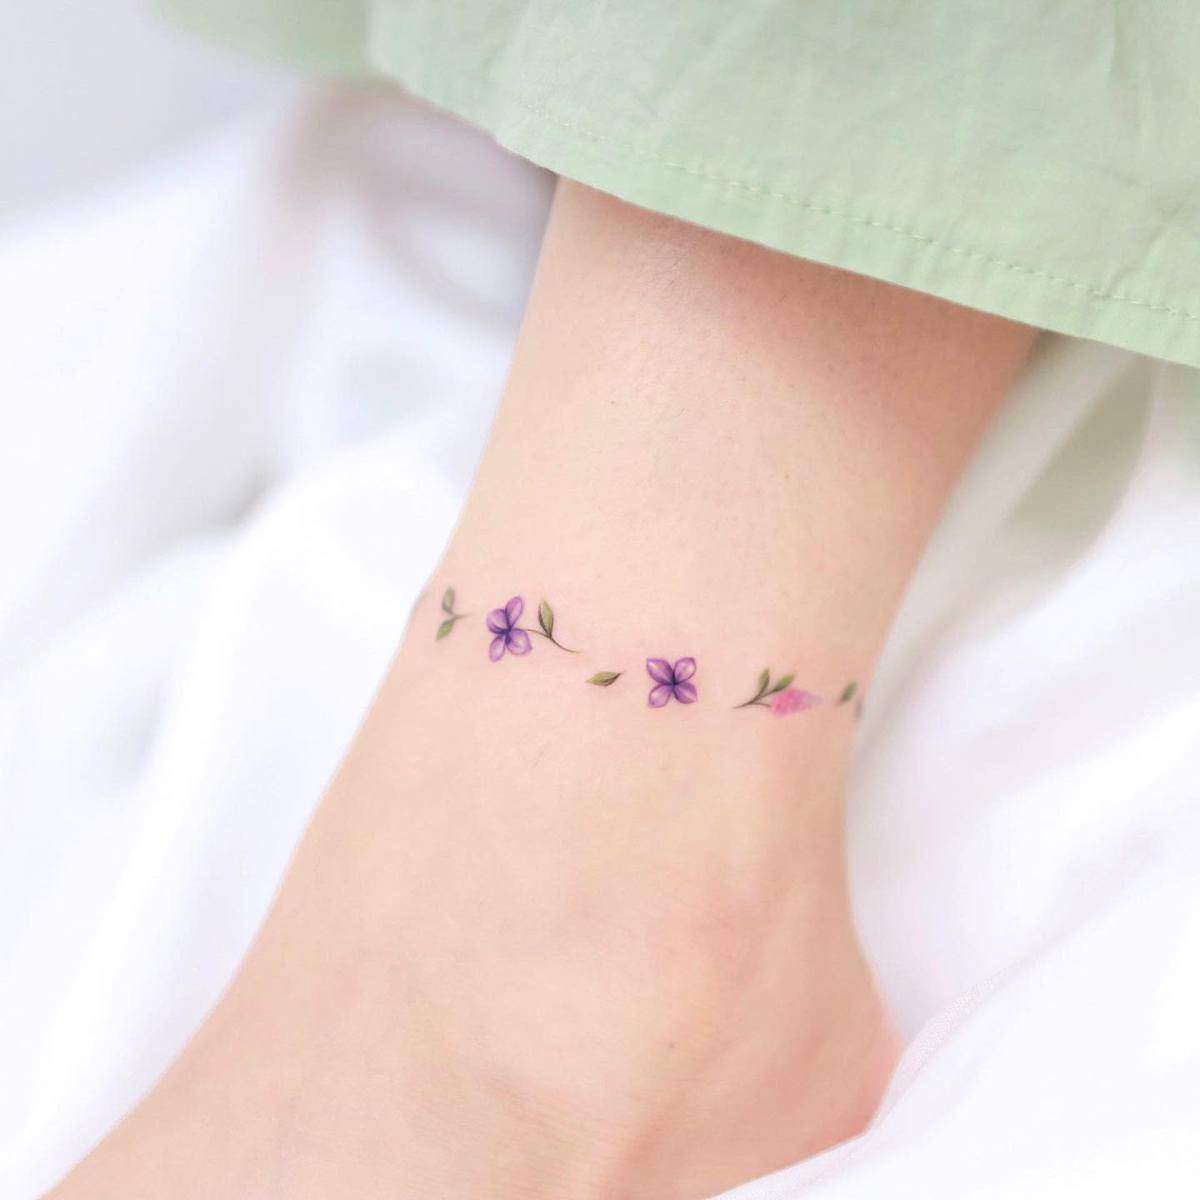 Foot Ankle Tattoos xiso_ink